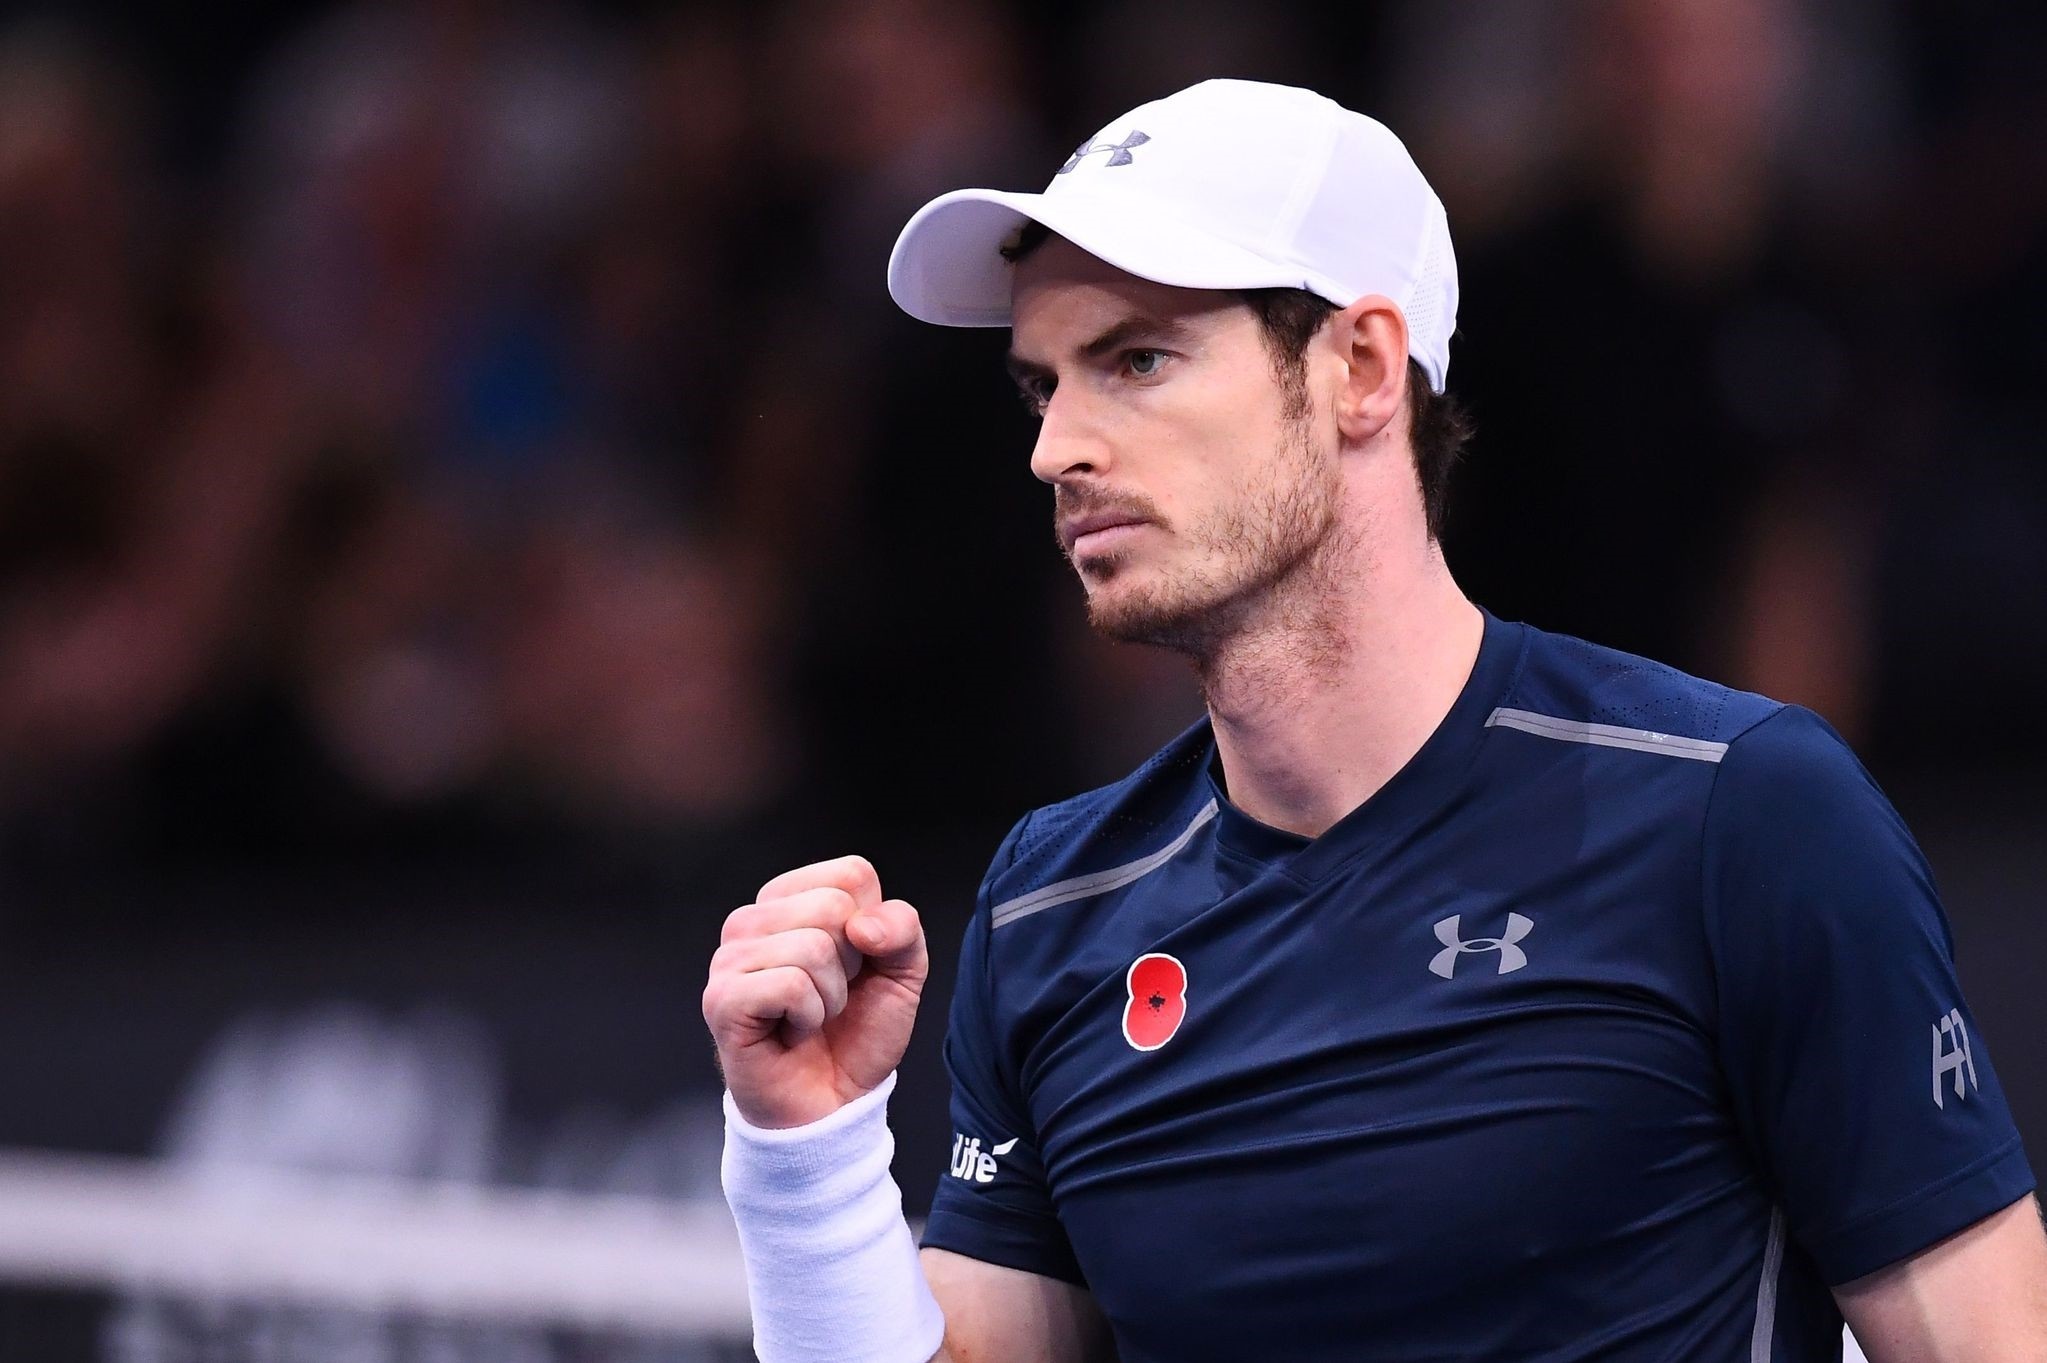 Murray celebrates after winning his quarter-final tennis match against Tomas Berdych at the ATP World Tour Masters 1000 indoor tournament in Paris on Nov. 4, 2016. (AFP Photo)